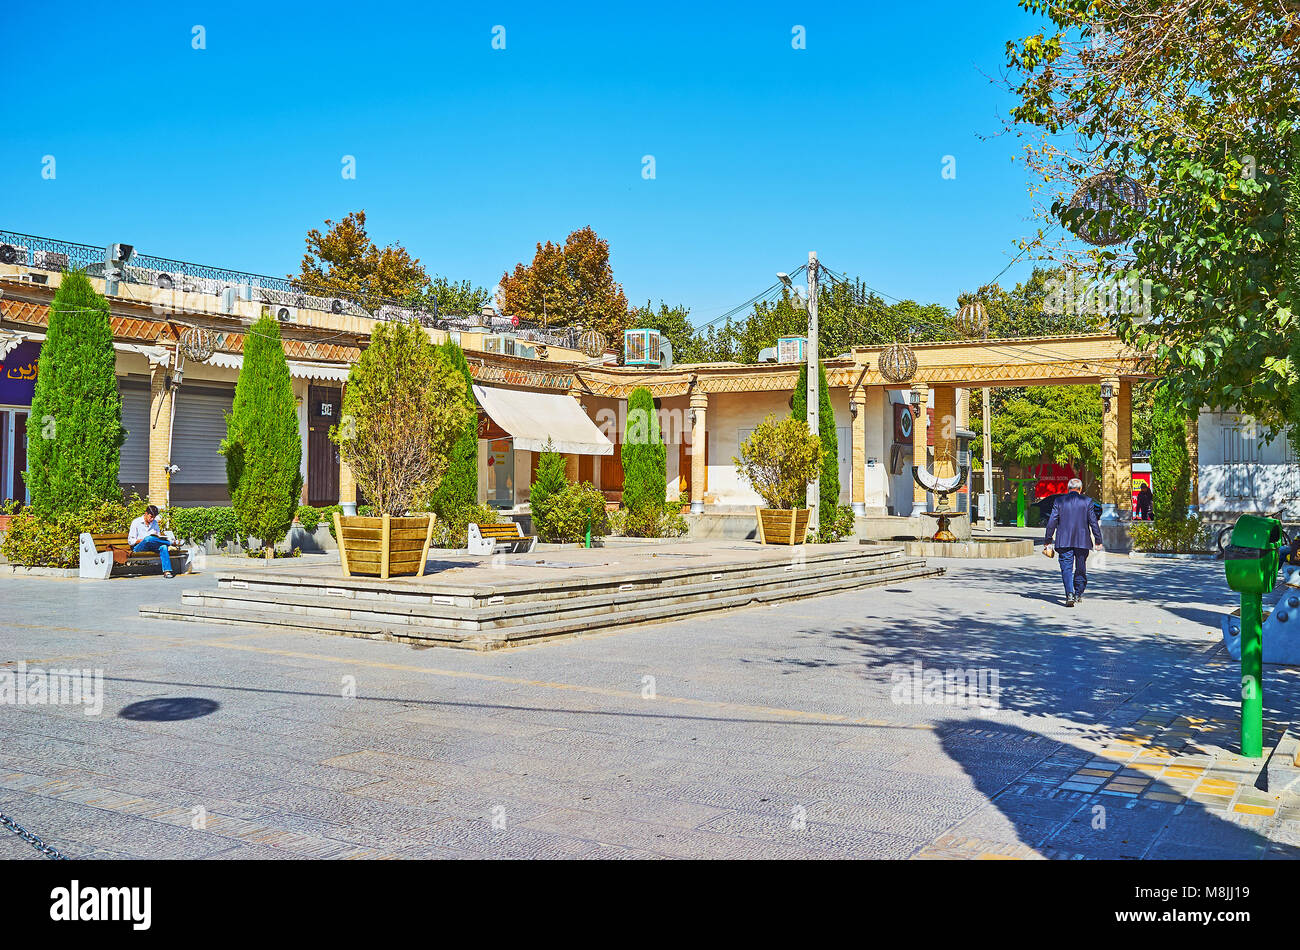 ISFAHAN, IRAN - OCTOBER 20,2017: The tiny park with thuja trees in Julfa square of Armenian neighborhood, this area is surrounded by stores and cafes, Stock Photo